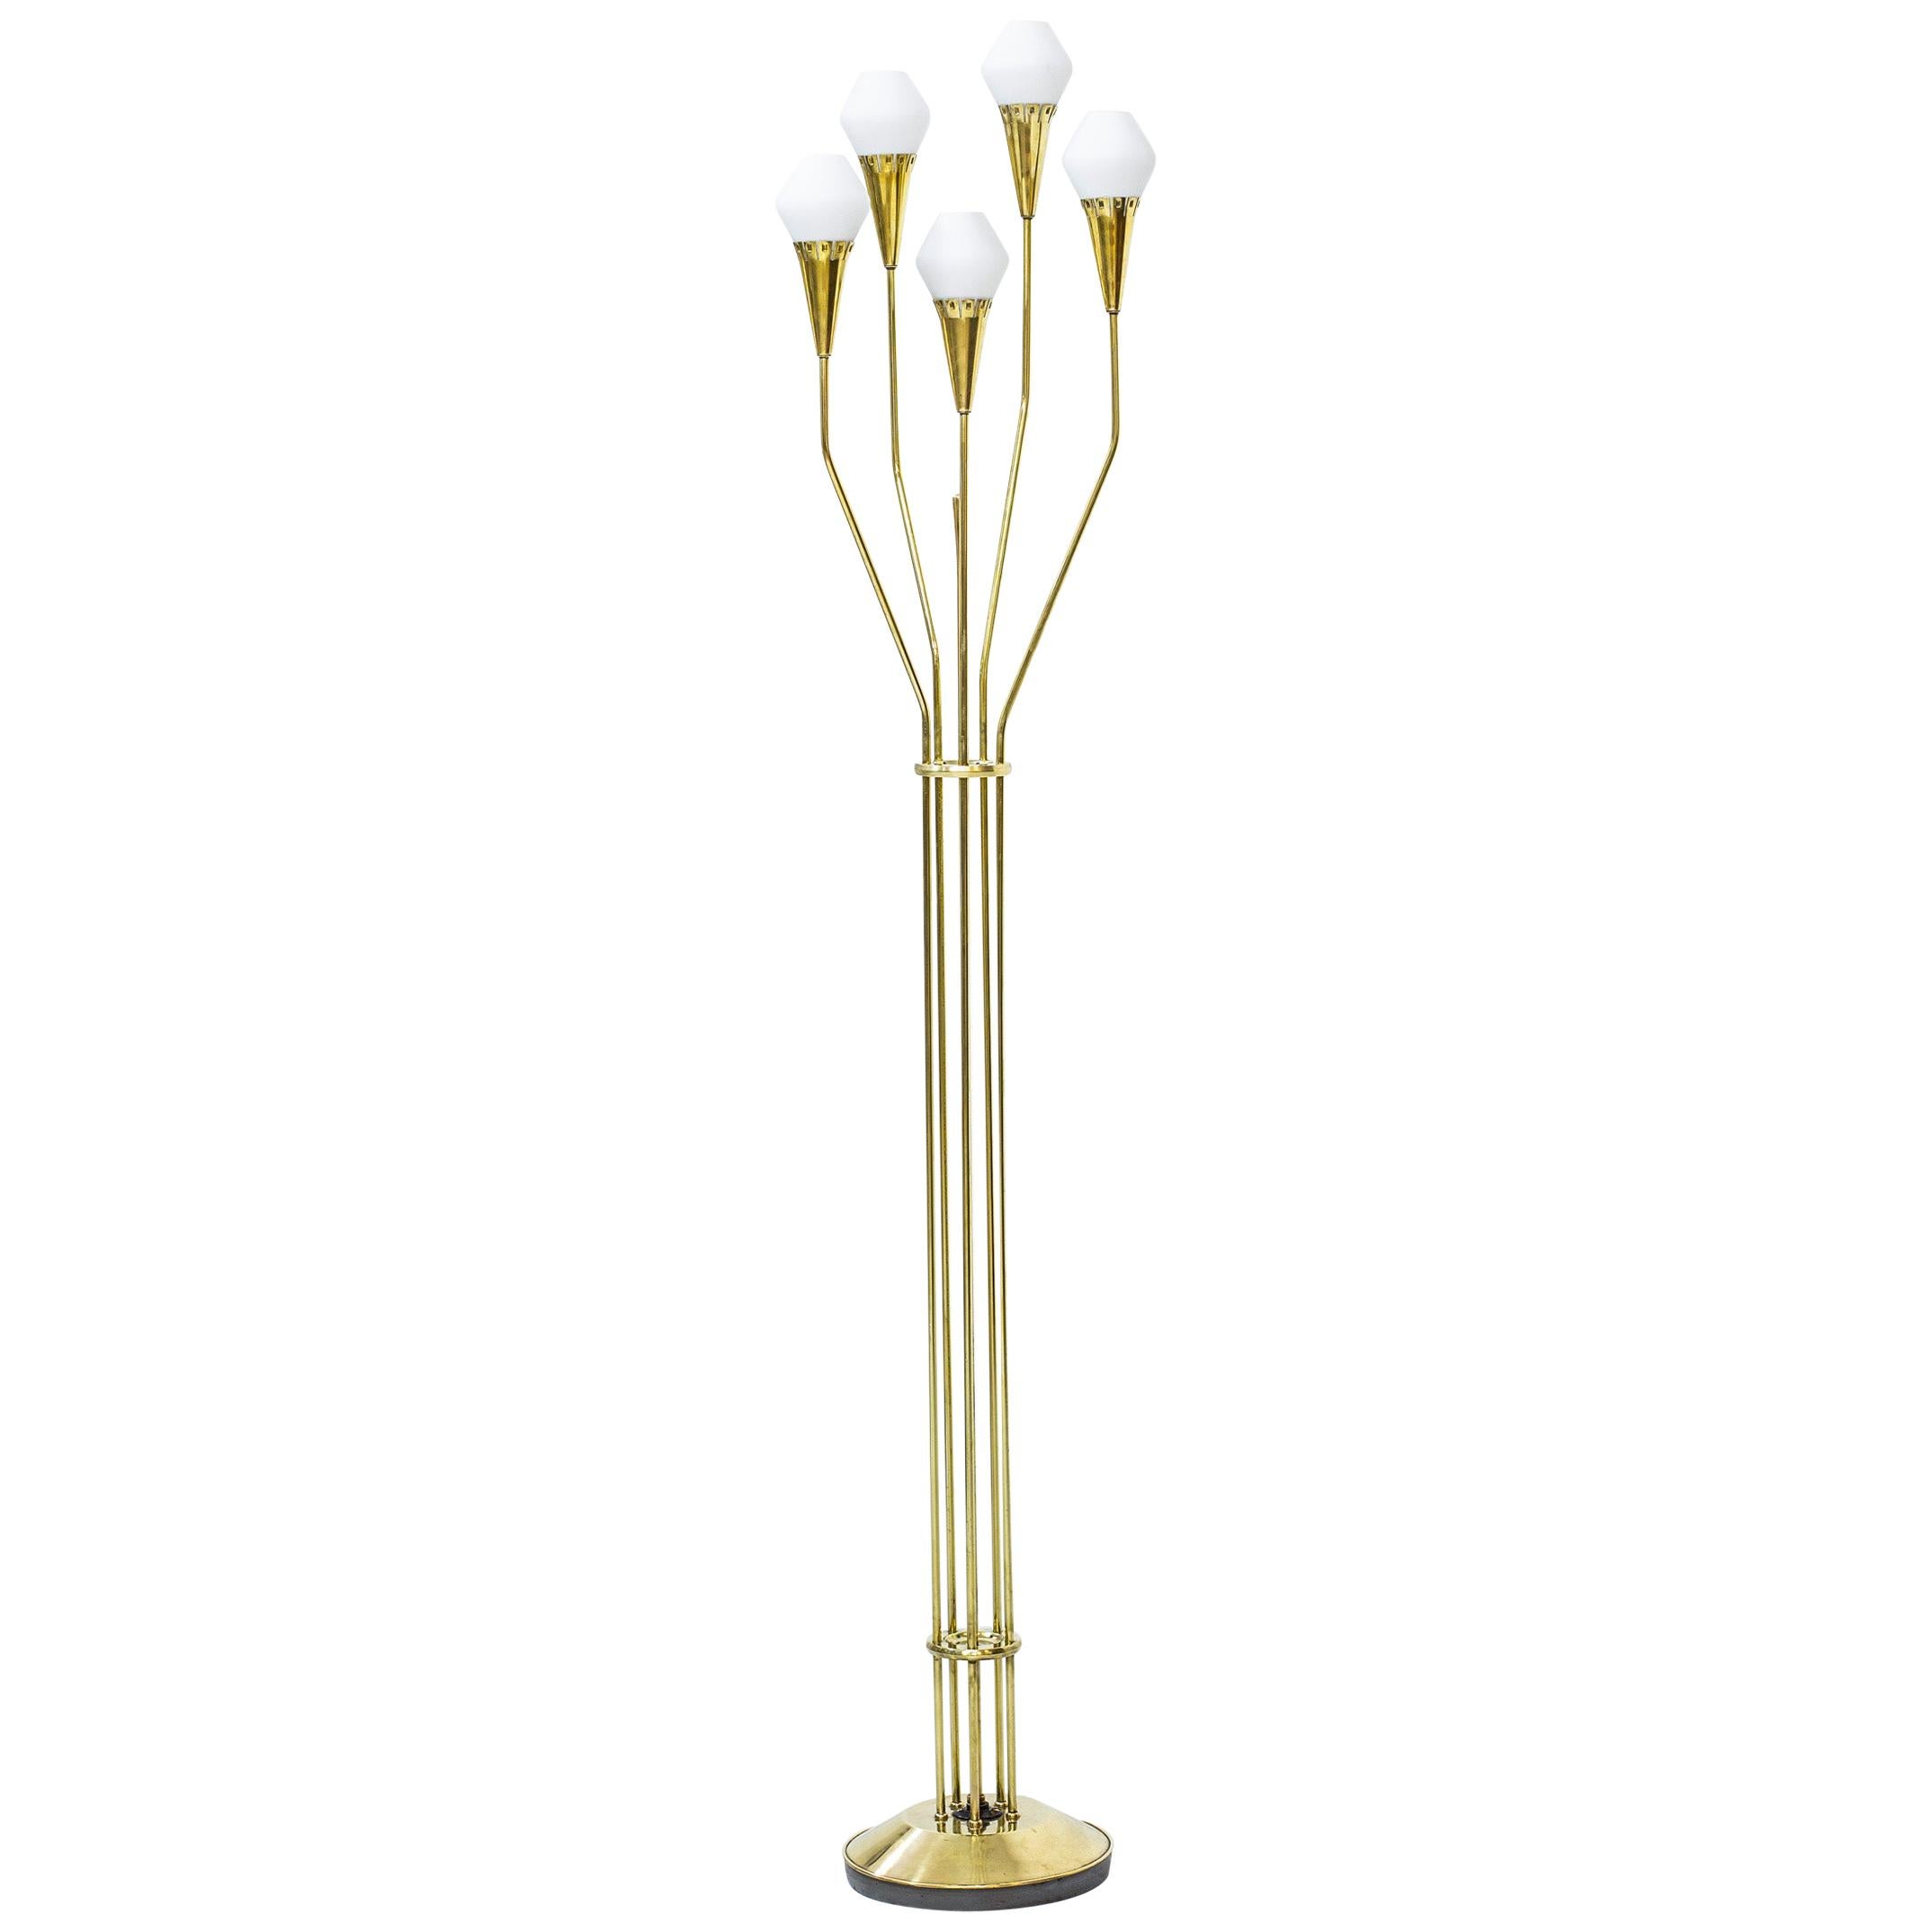 Brass and Glass Floor Lamp "15647" by Böhlmarks, Sweden, 1940s